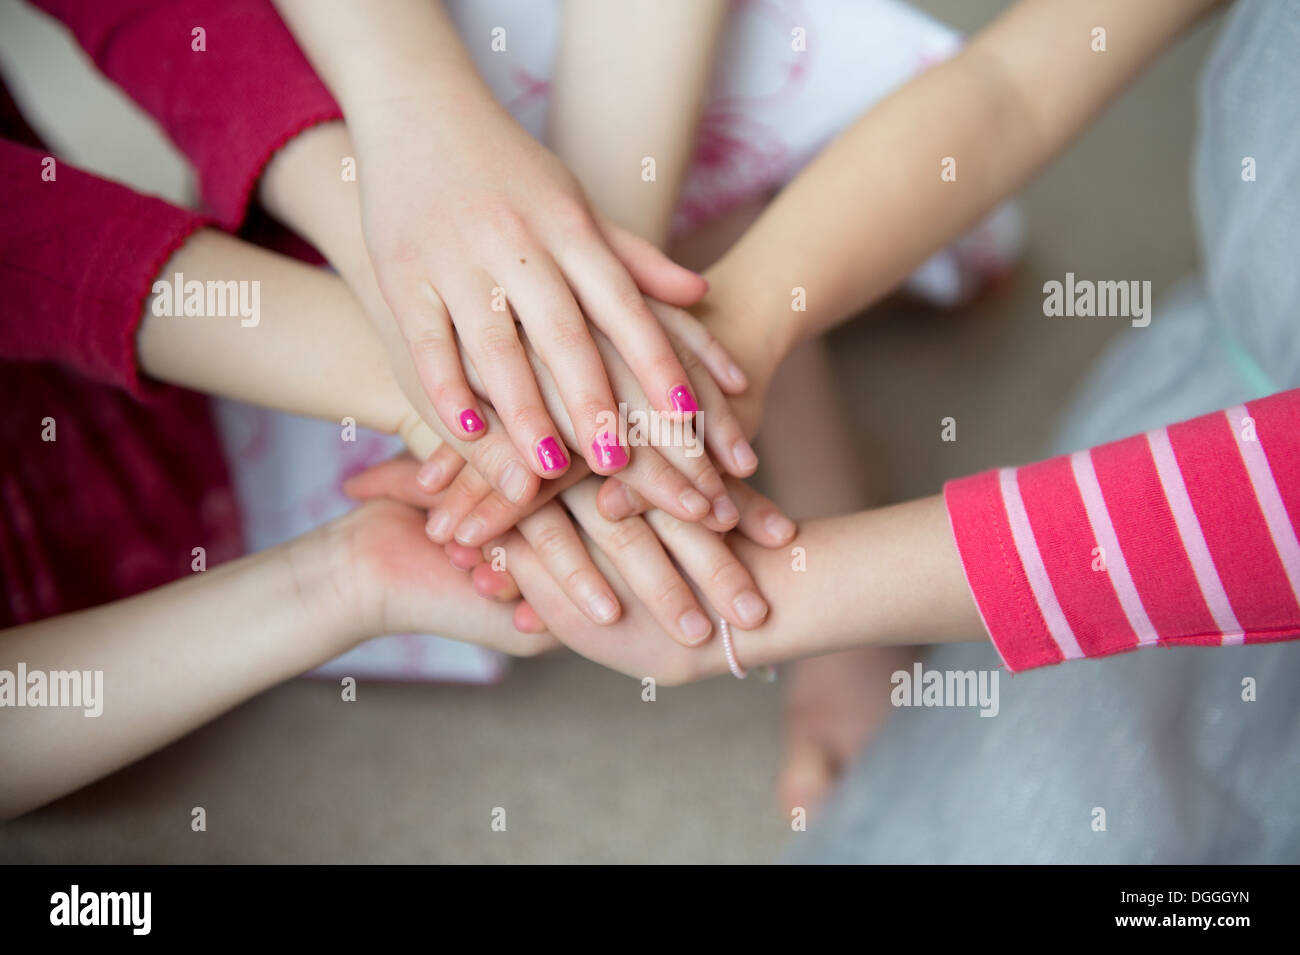 Girls putting hands together, close up Stock Photo